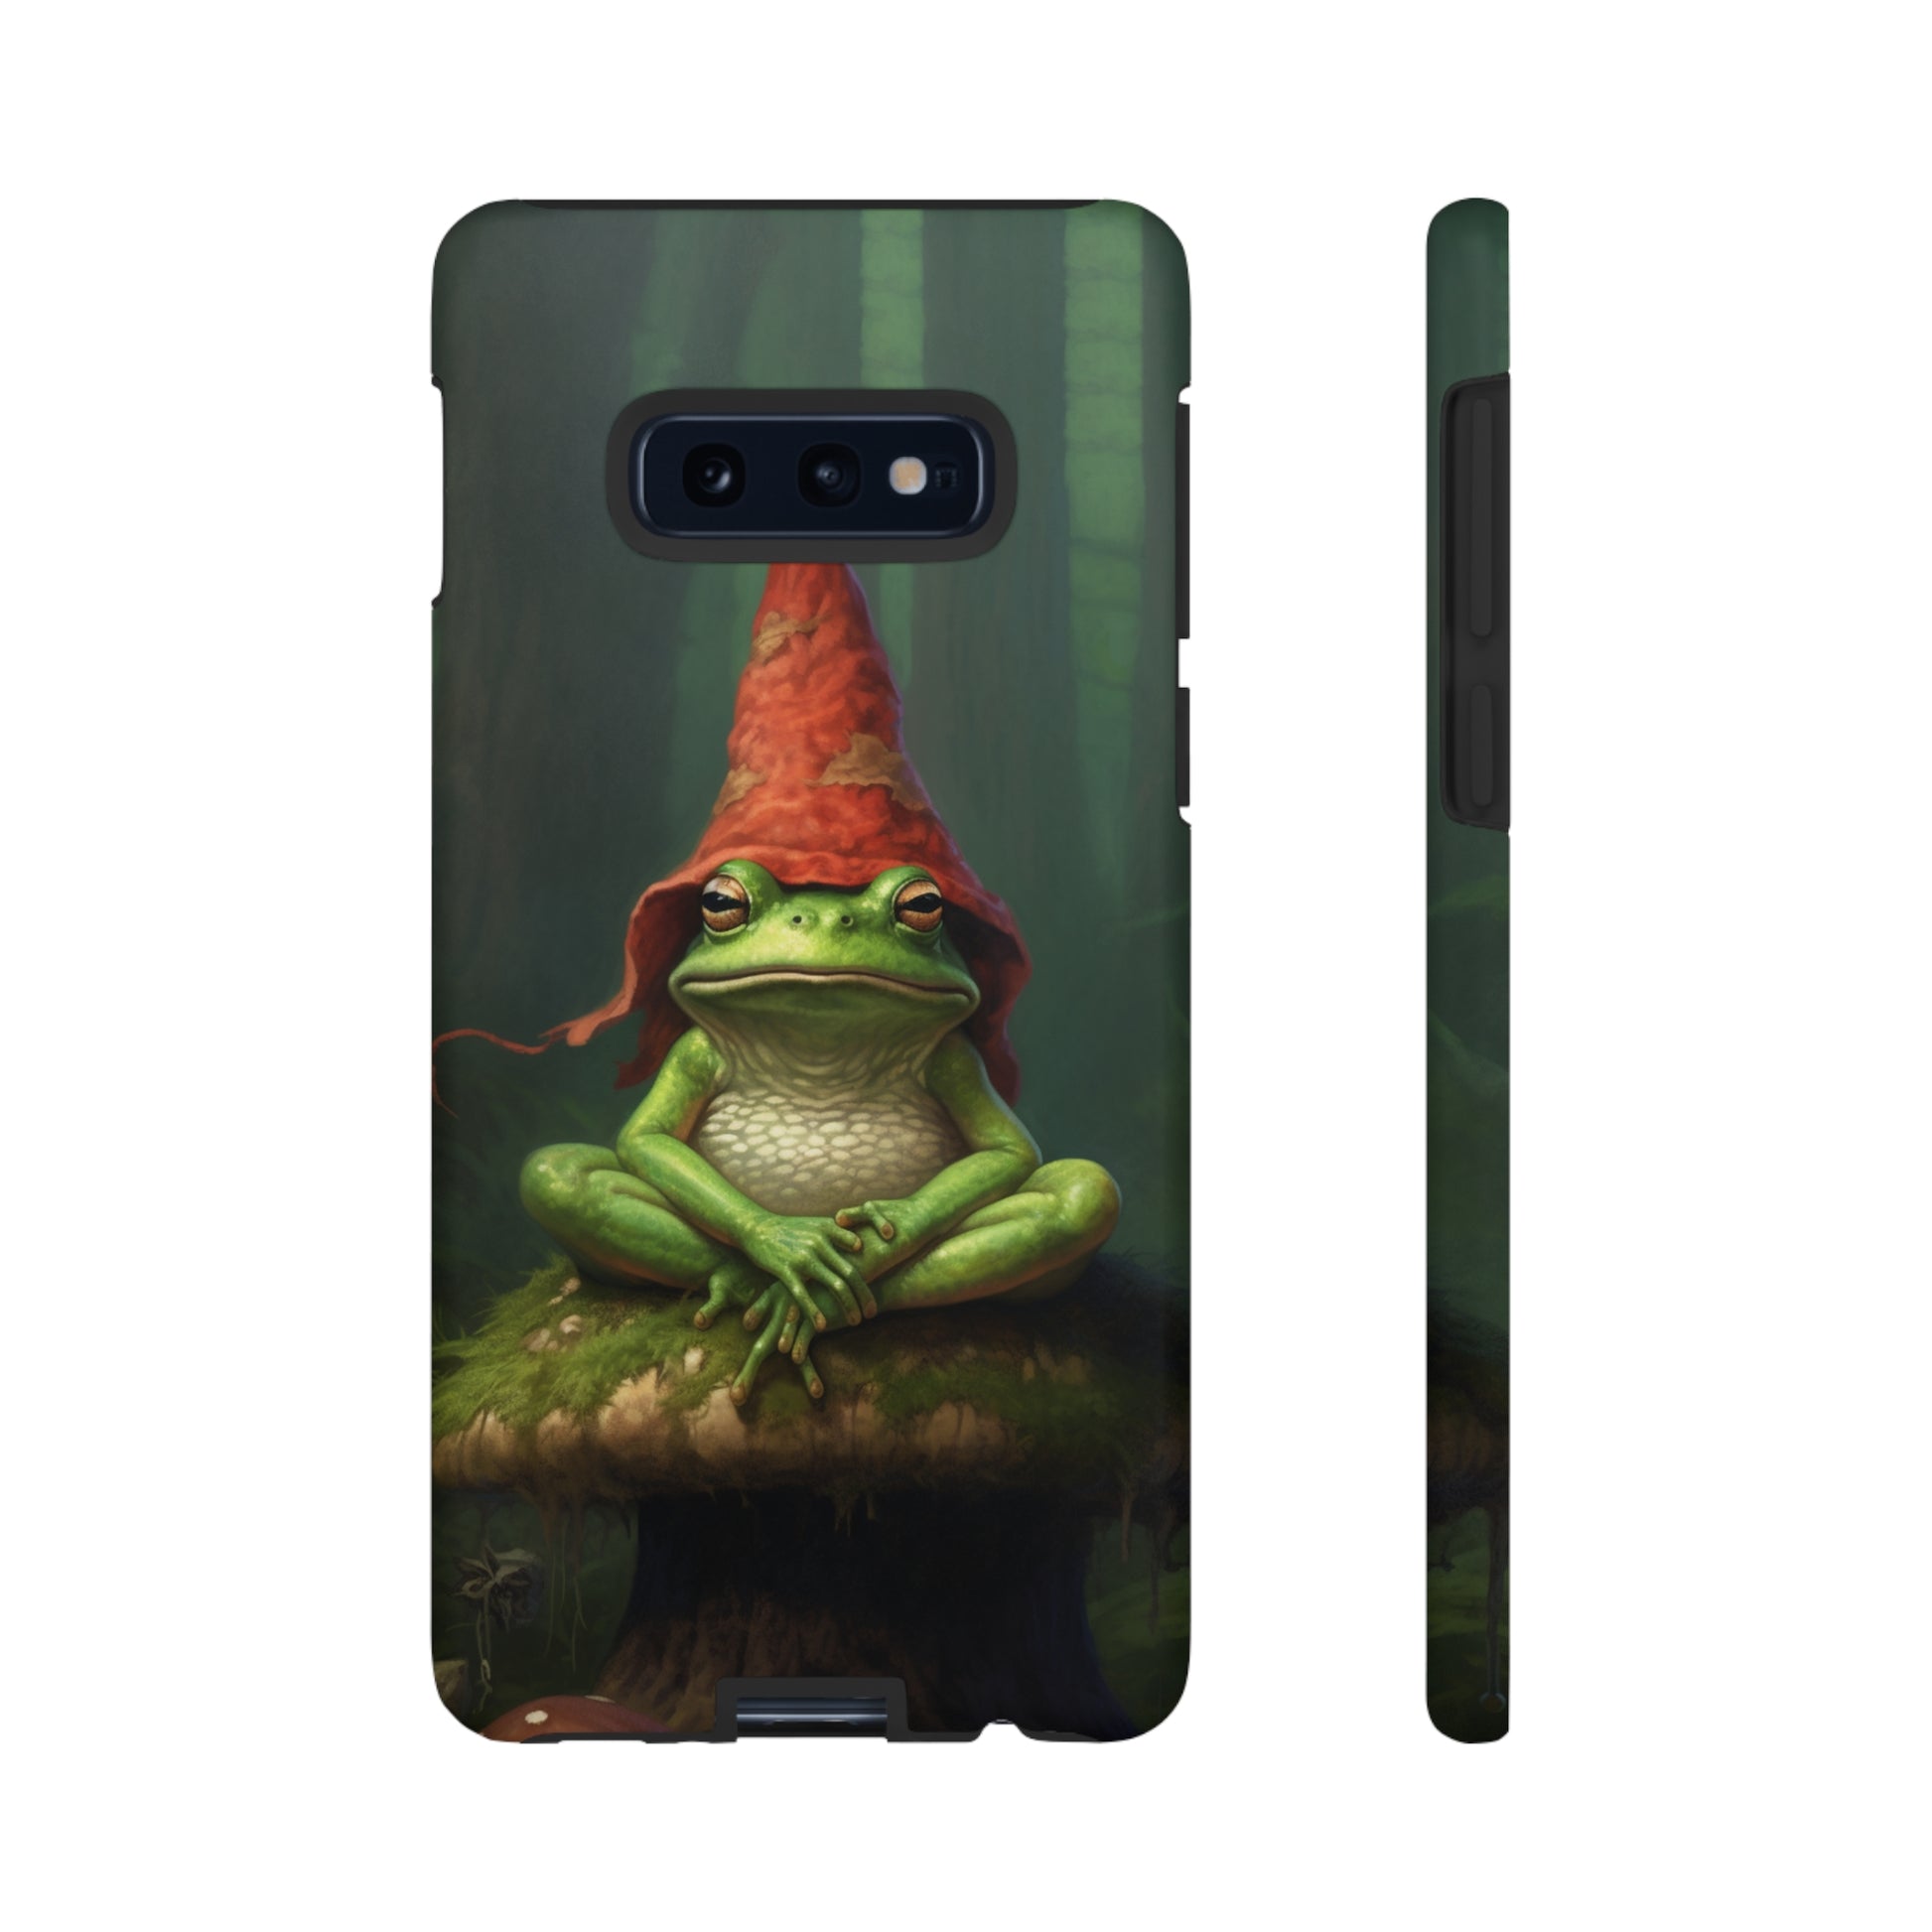 Psychedelic Mushrooms Frog themed Samsung Galaxy case.